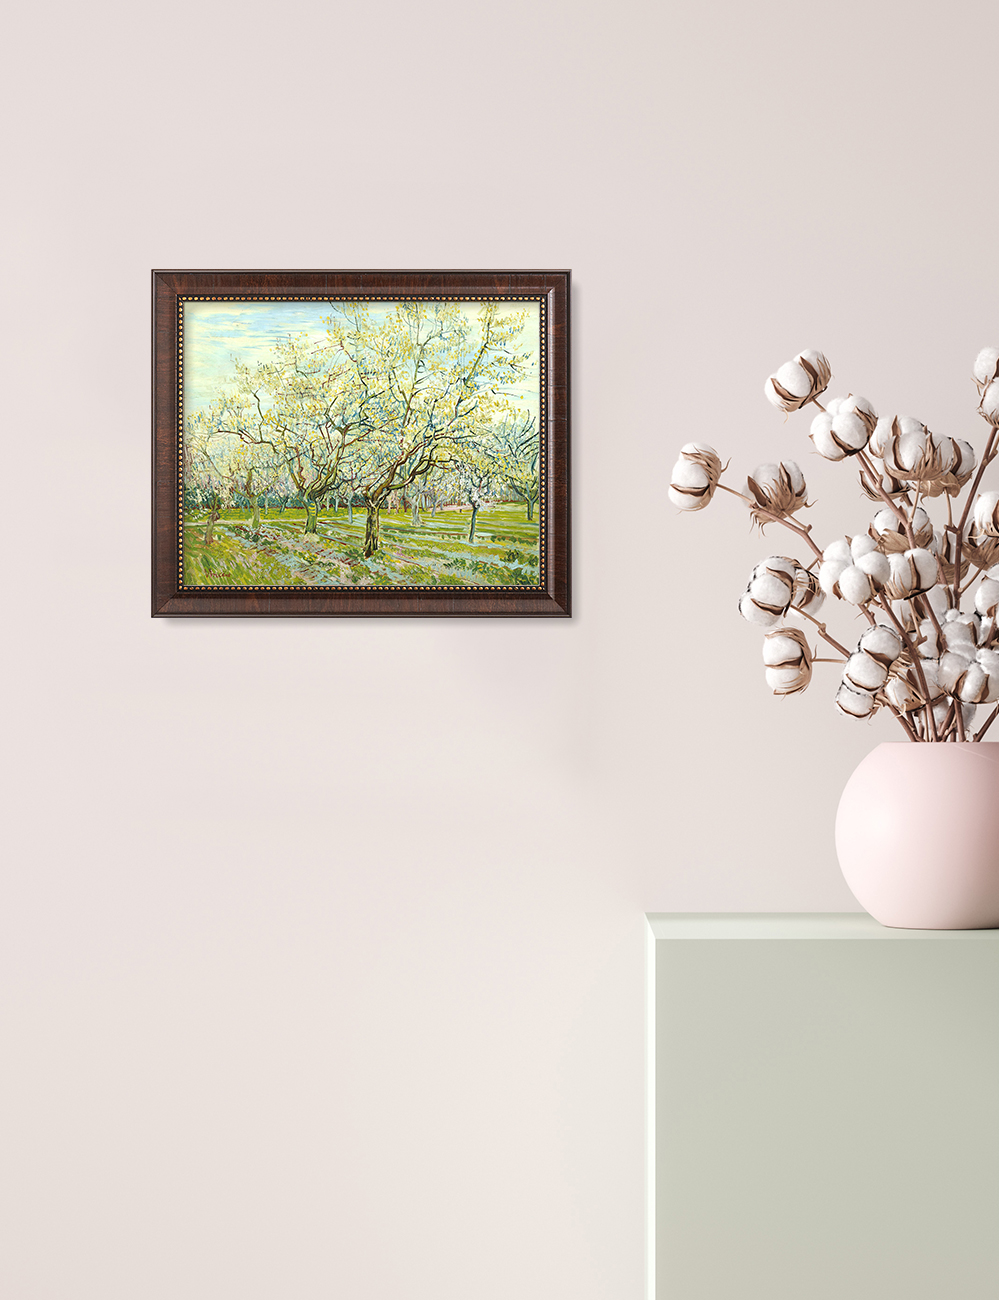 DECORARTS The White Orchard Vincent Van Gogh Giclee Prints w/ Antique  Brown Frame for Wall Decor. Picture Size: 20x16